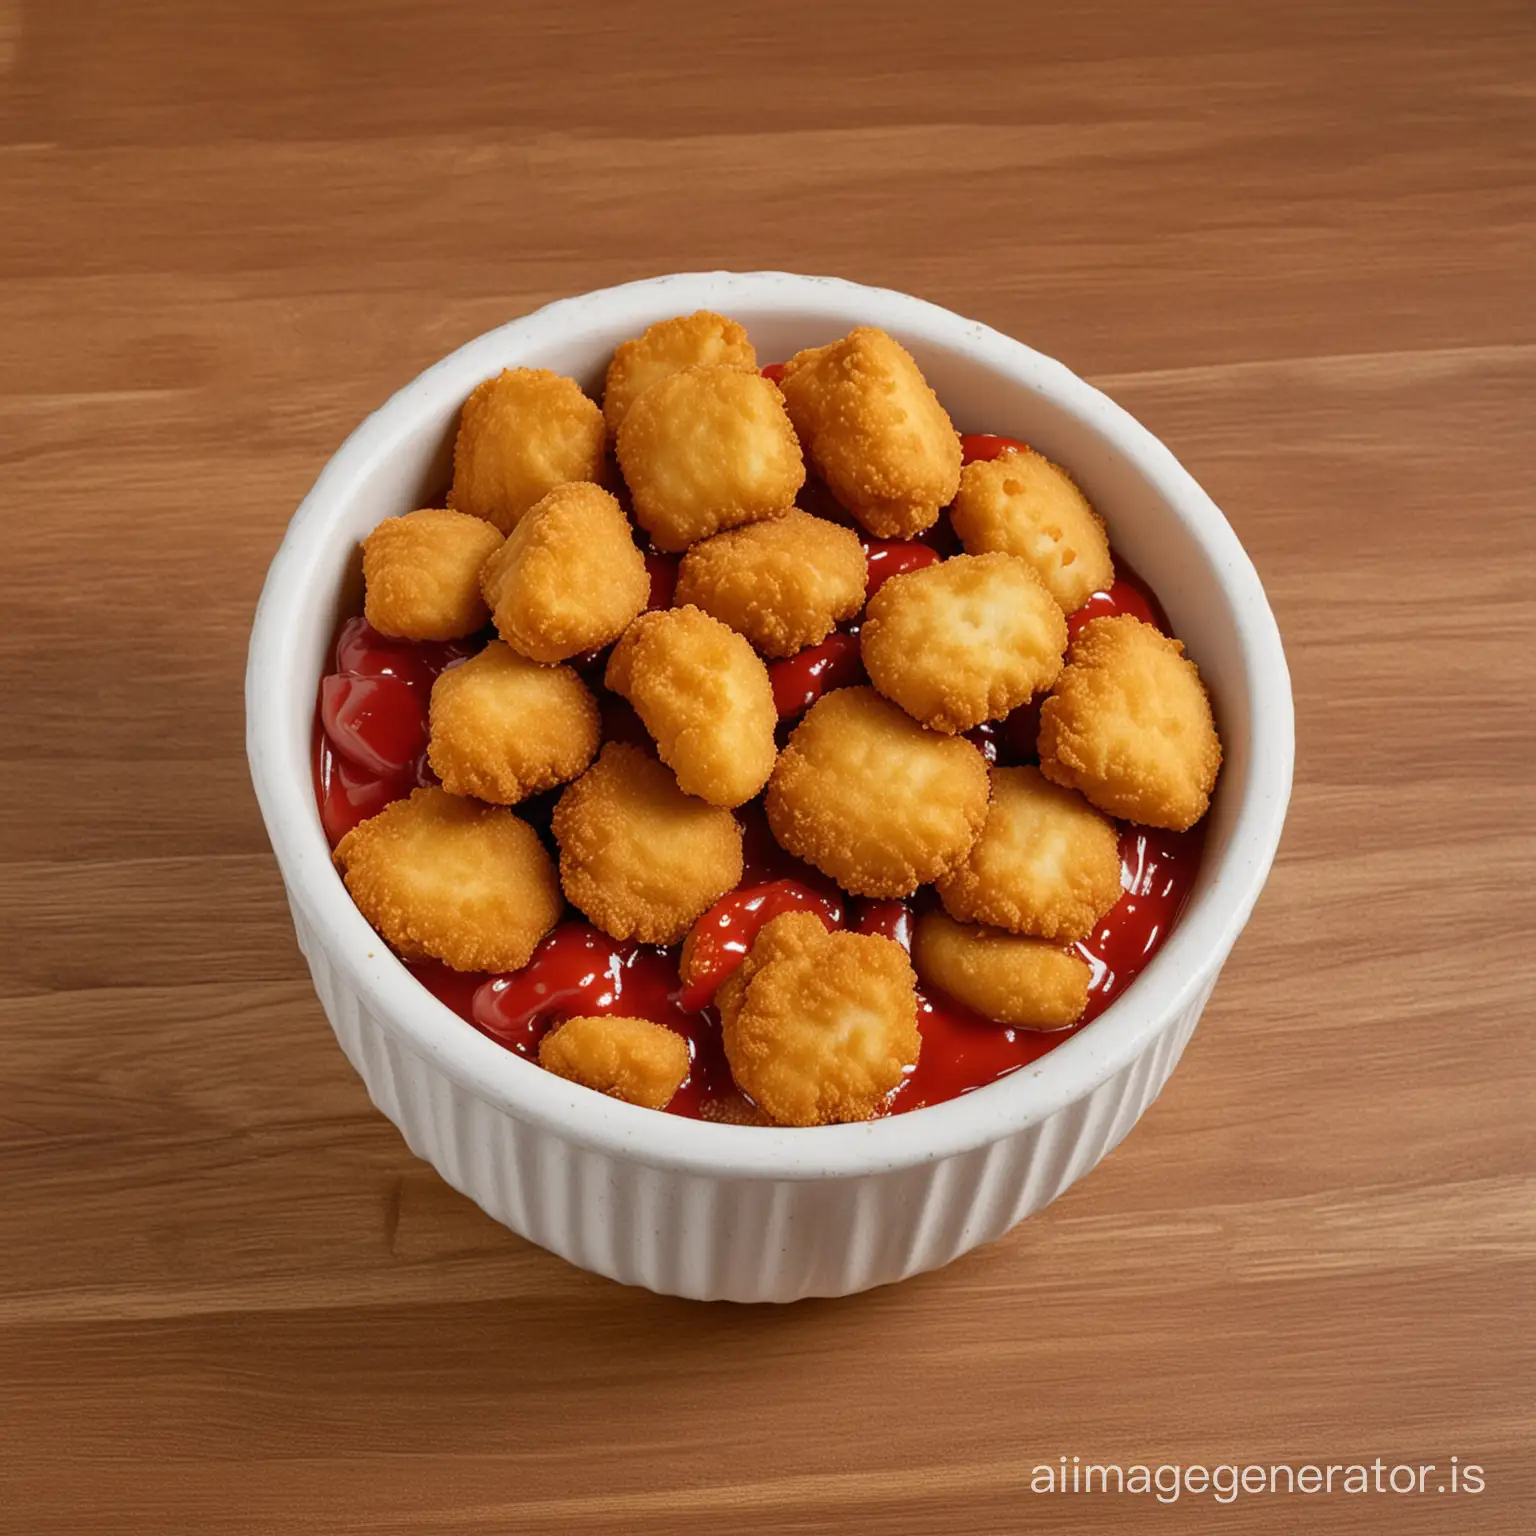 Giant-MountainSized-Bowl-Overflowing-with-Chicken-Nuggets-and-Ketchup